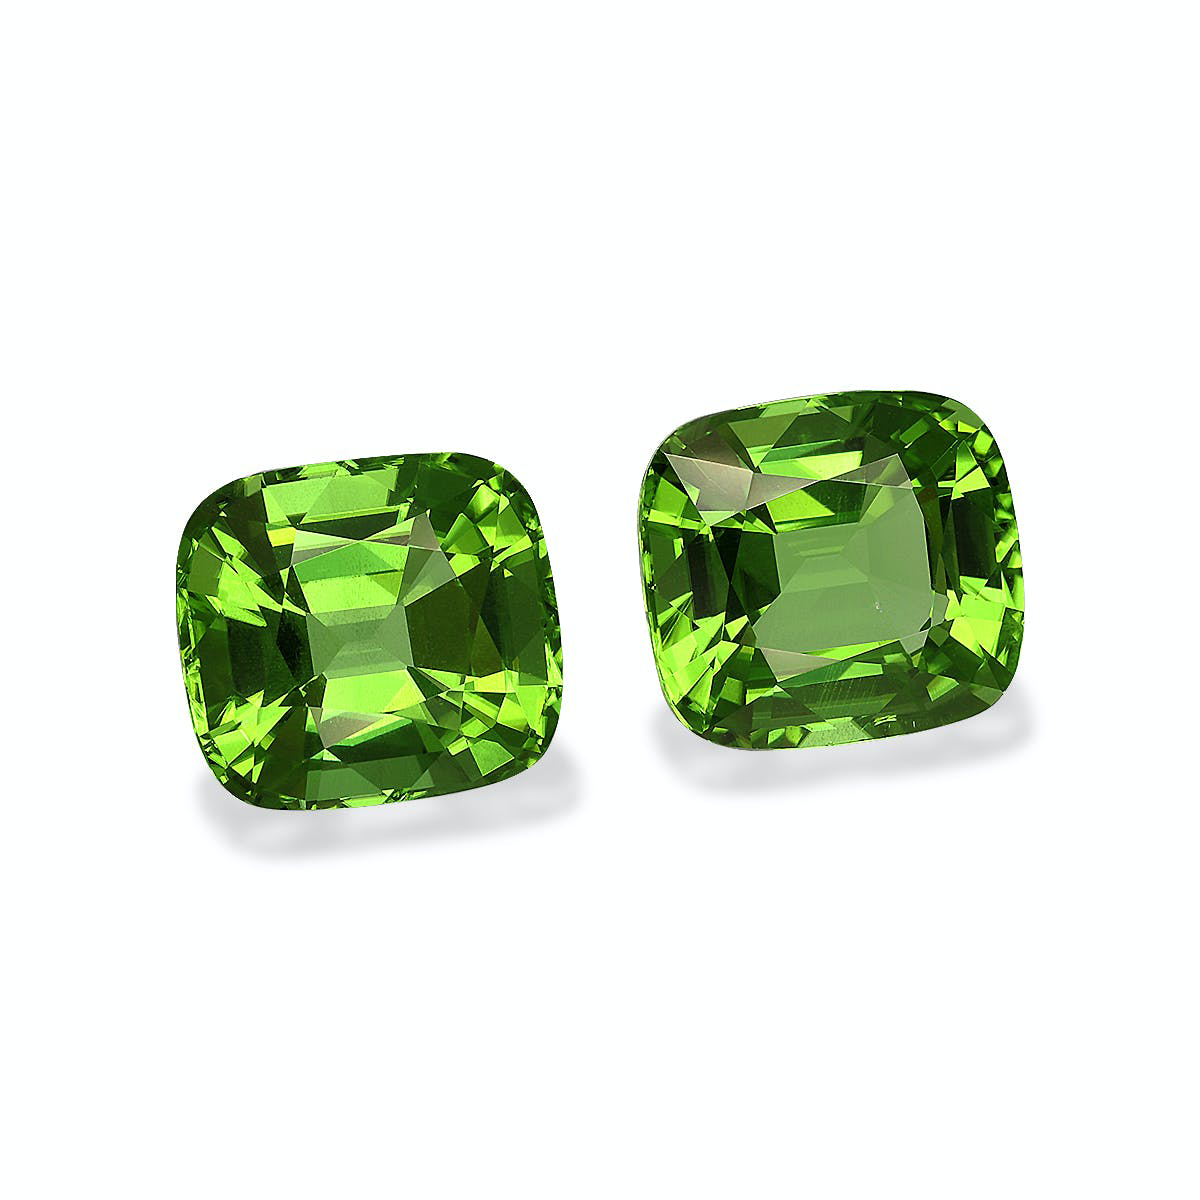 Picture of Vivid Green Peridot 17.19ct - Pair (PD0349)